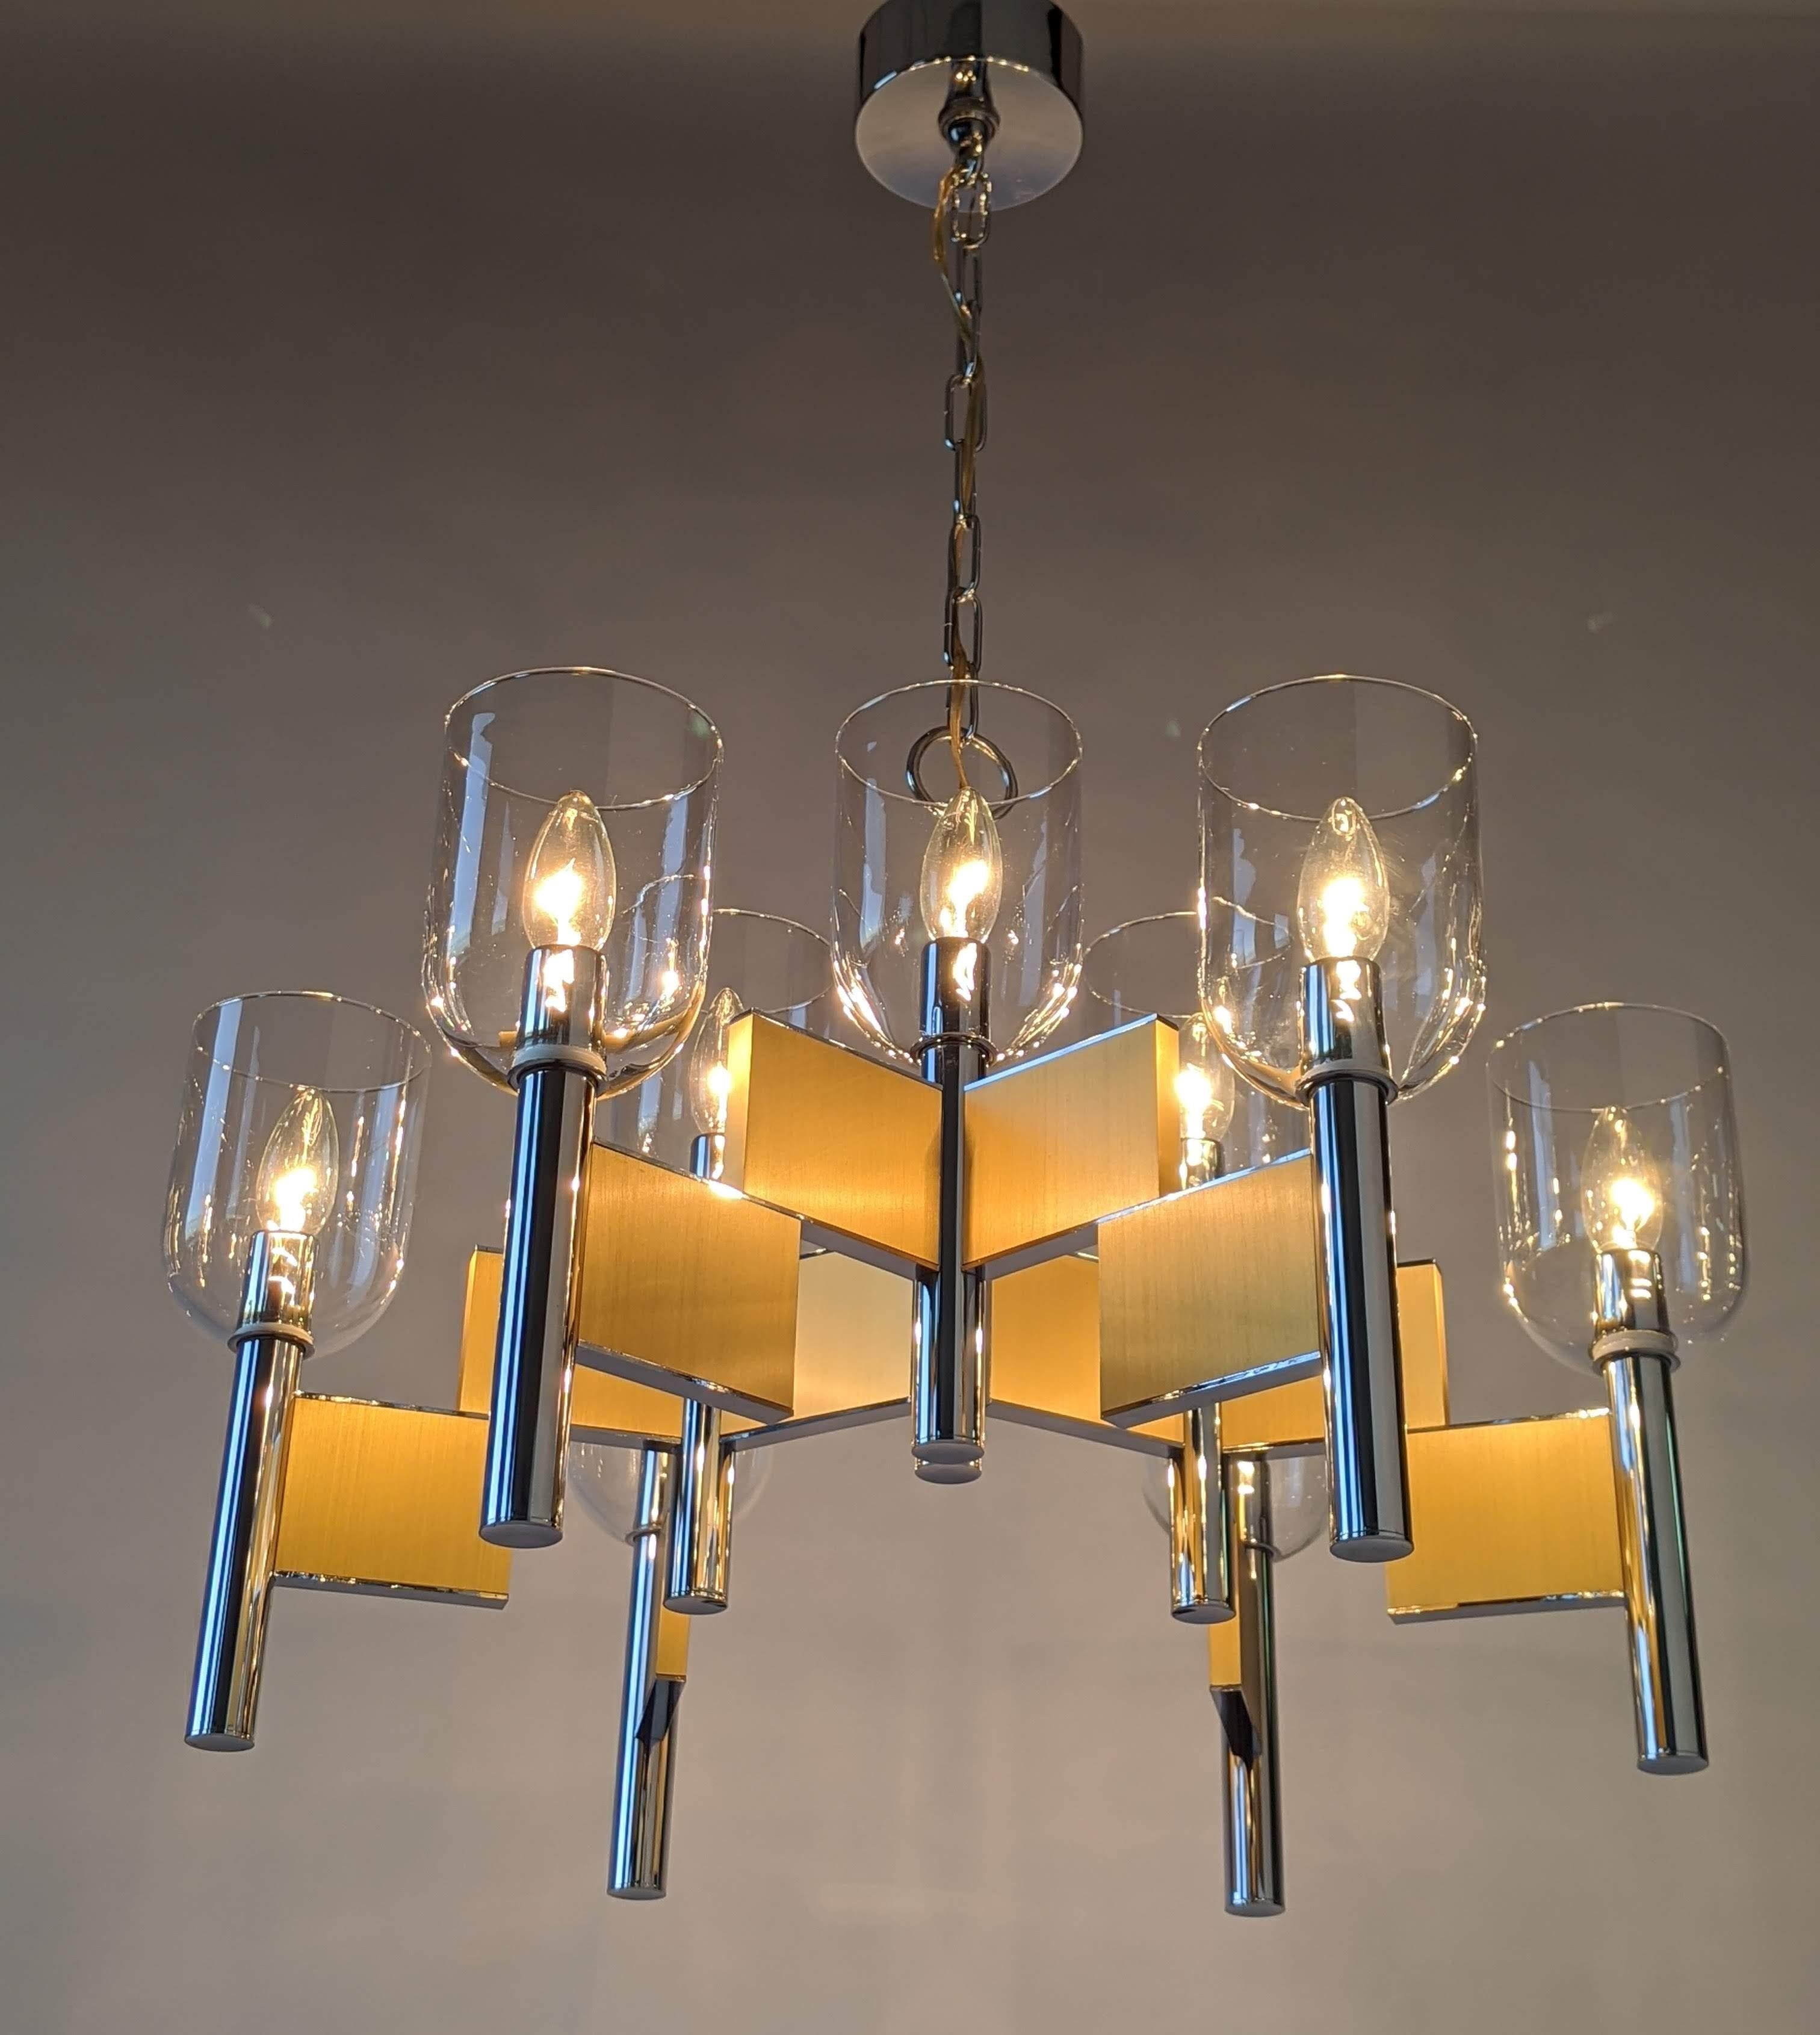 Mouth blowed glass hurricane chandelier made of thick chromed steel and brass. 

Prime quality material, solid construction.

Chandelier measure 25 in. wide by 19 in. high.

Chain length with canopy 16 in. high. Could be adjusted.

9 E12 candelabra